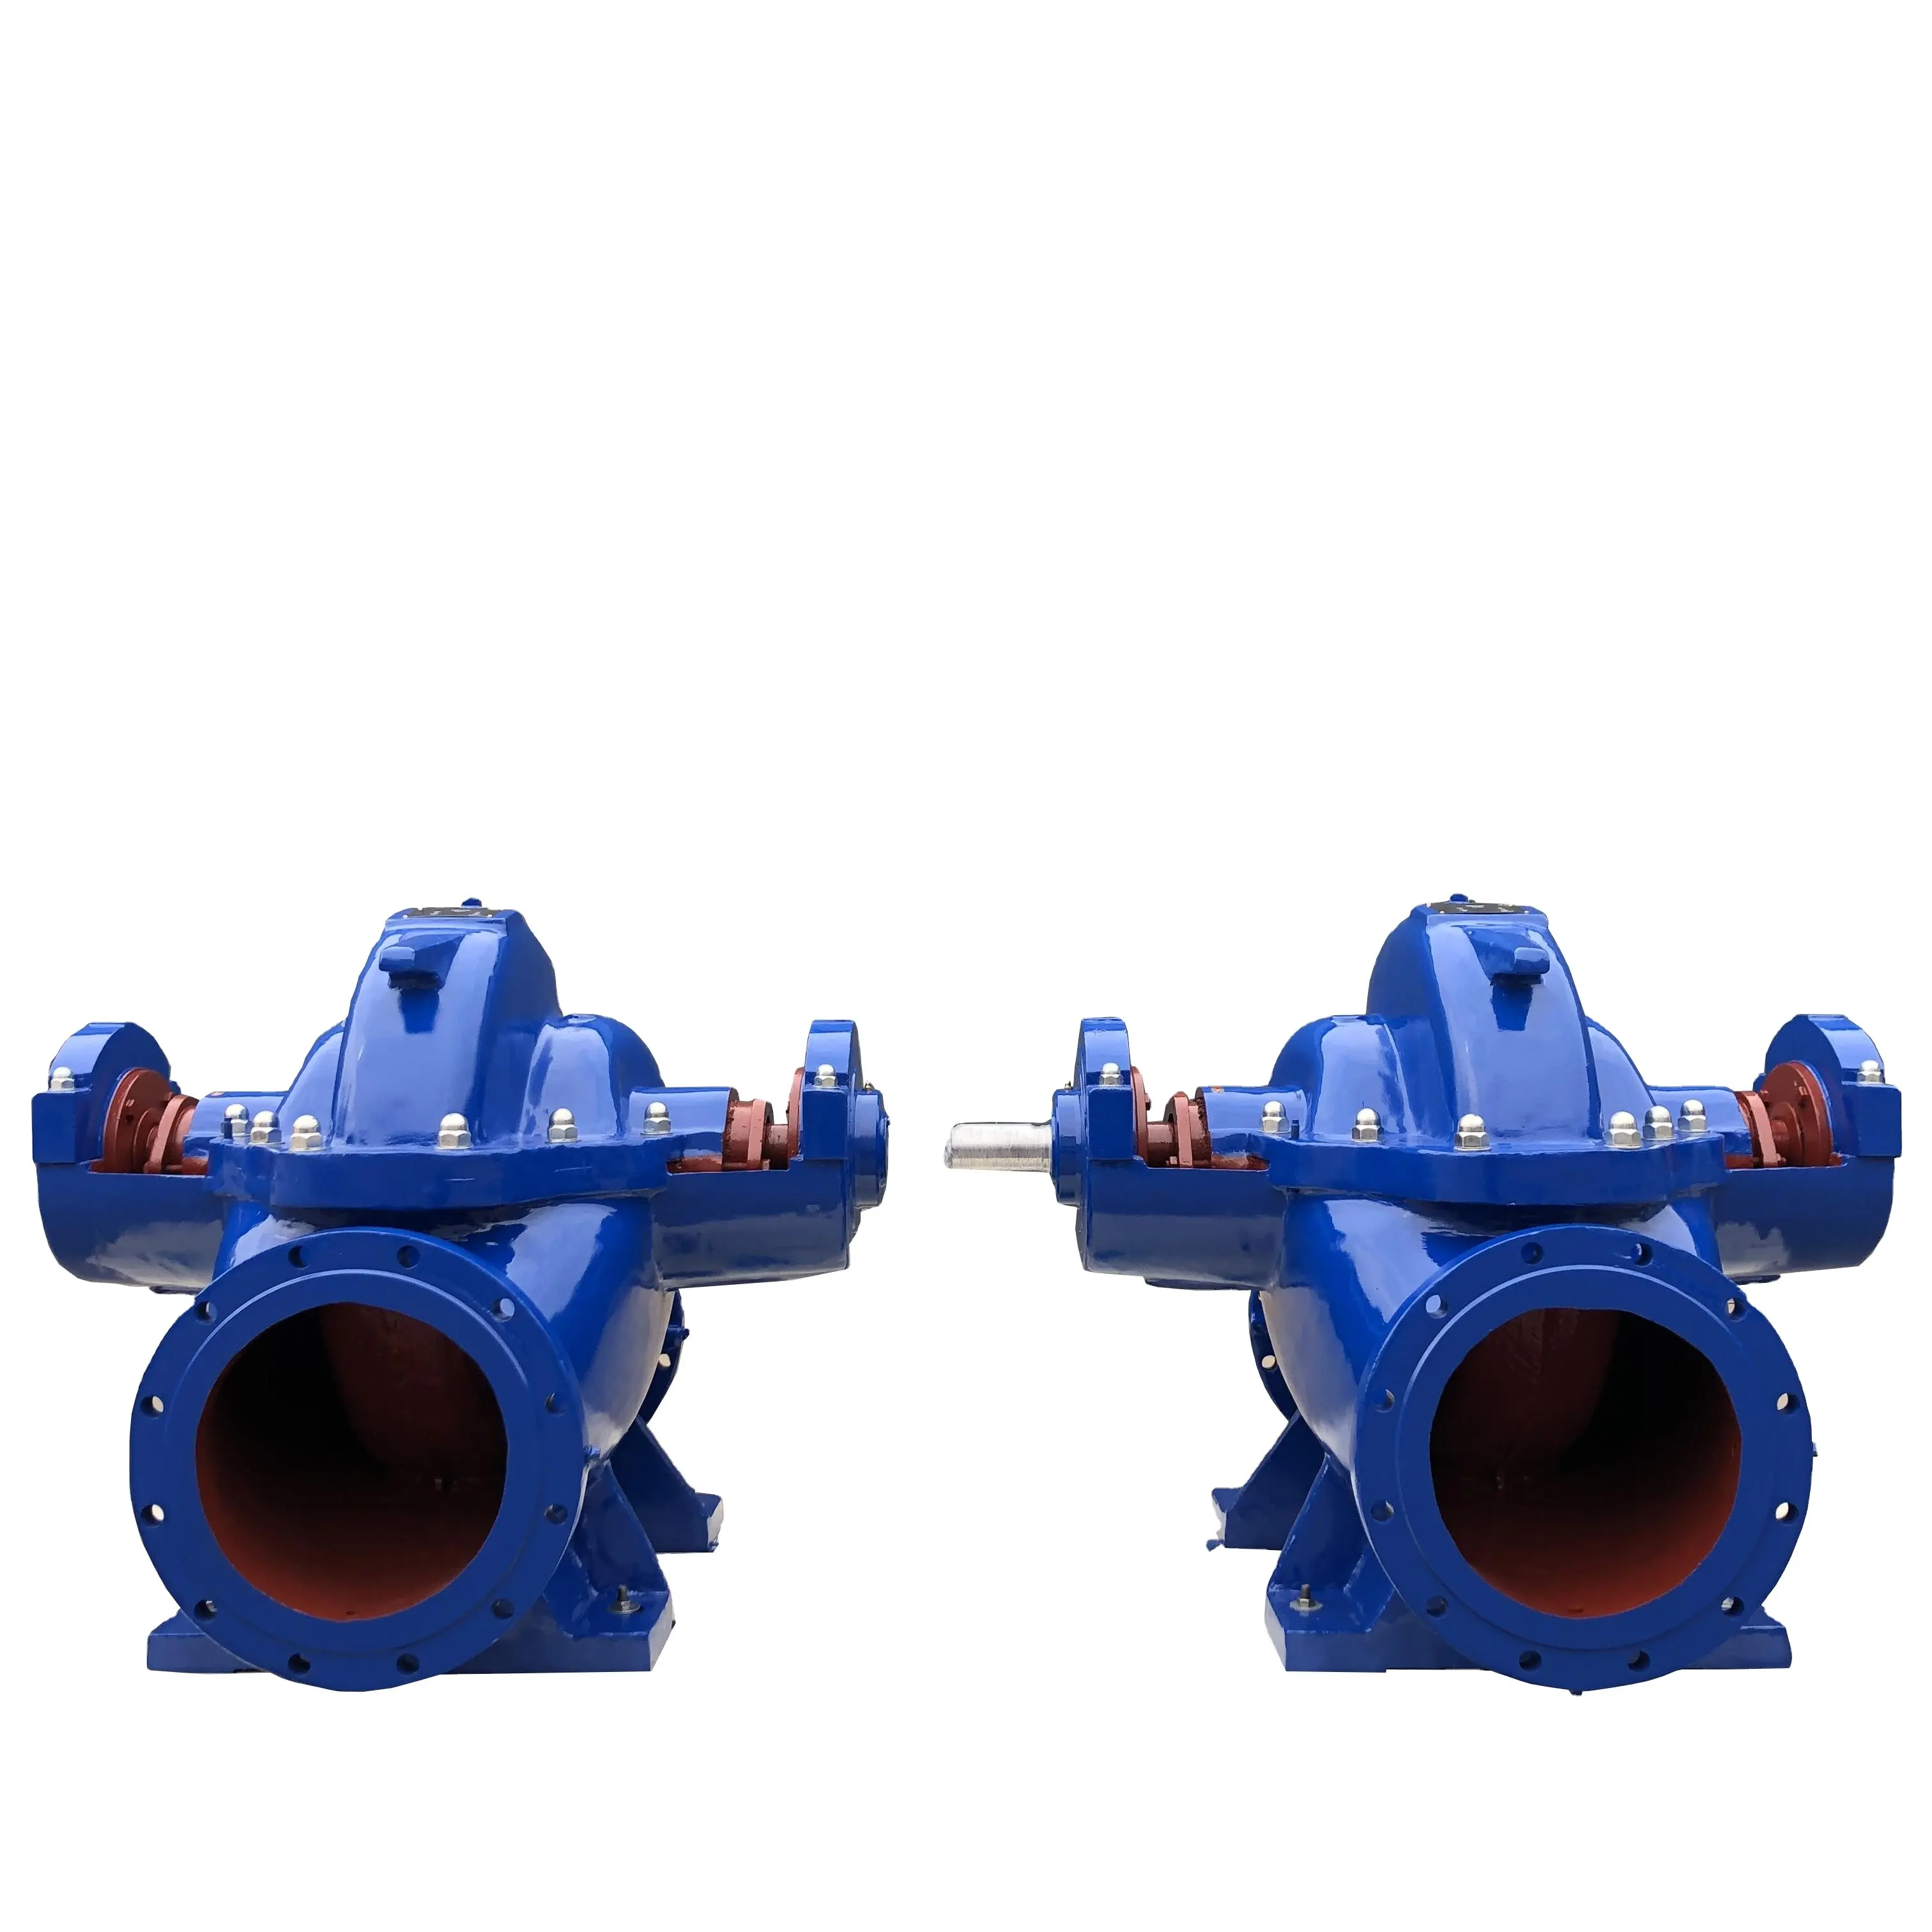 Cut stainless steel impeller double suction pump for high pressure shower water